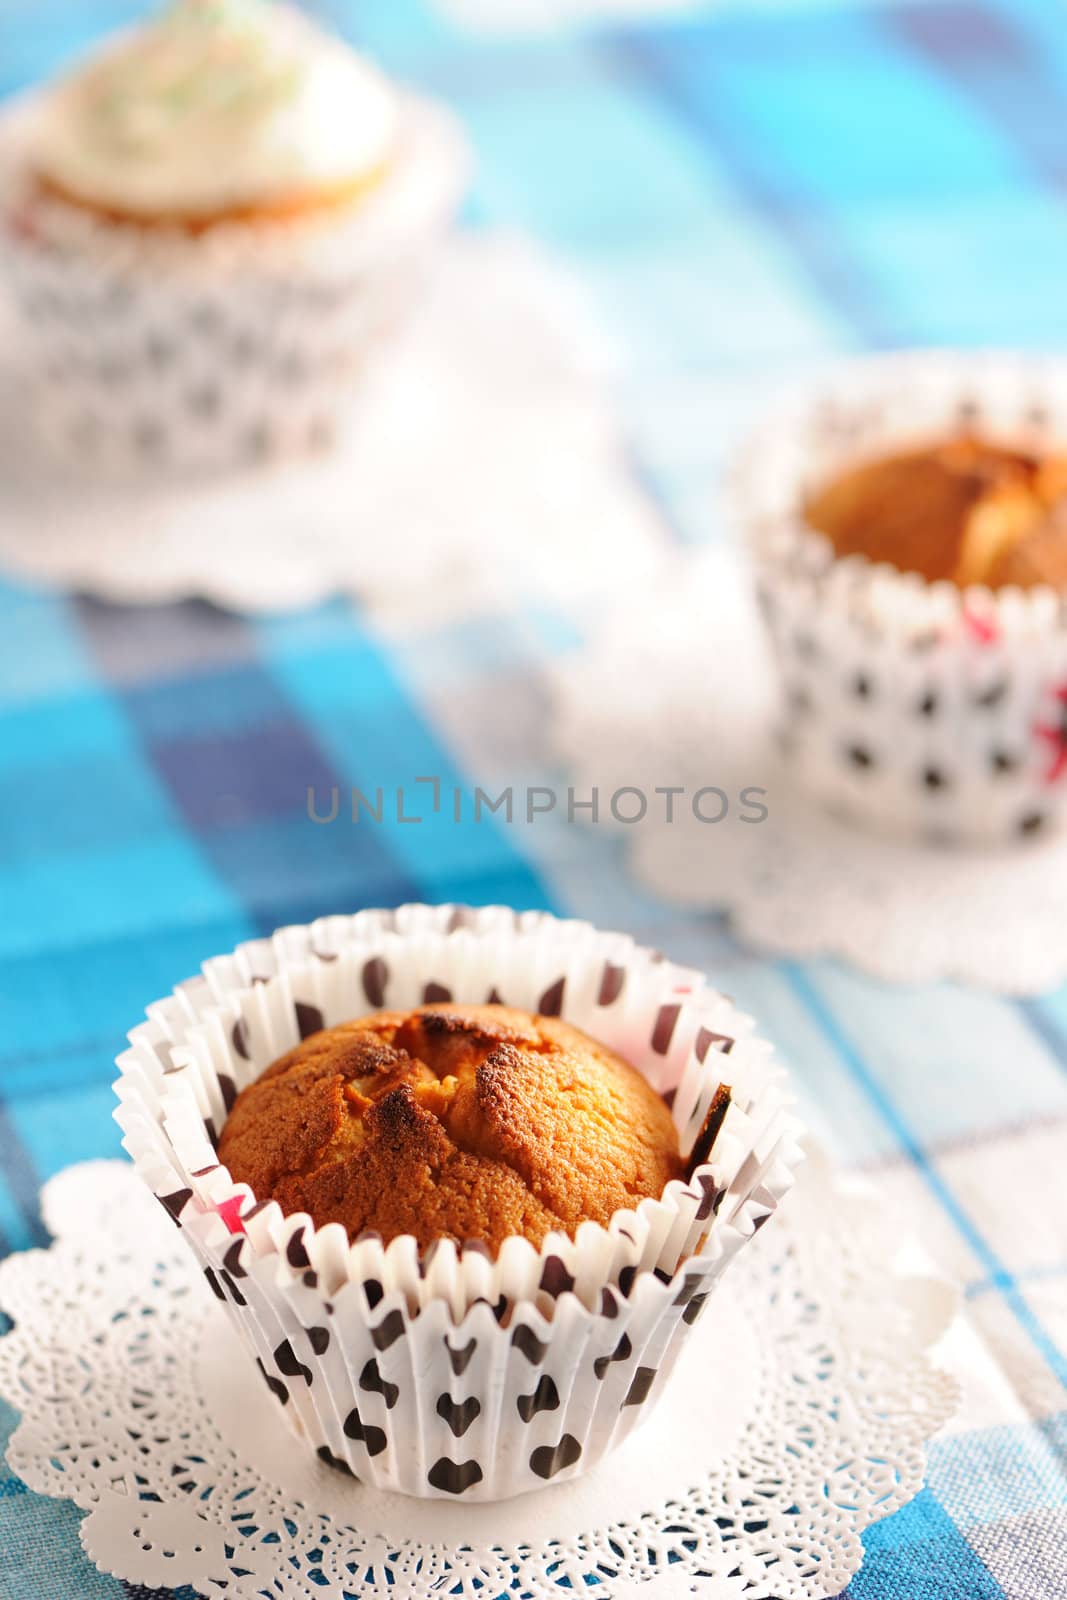 Delicious homemade muffins on the table